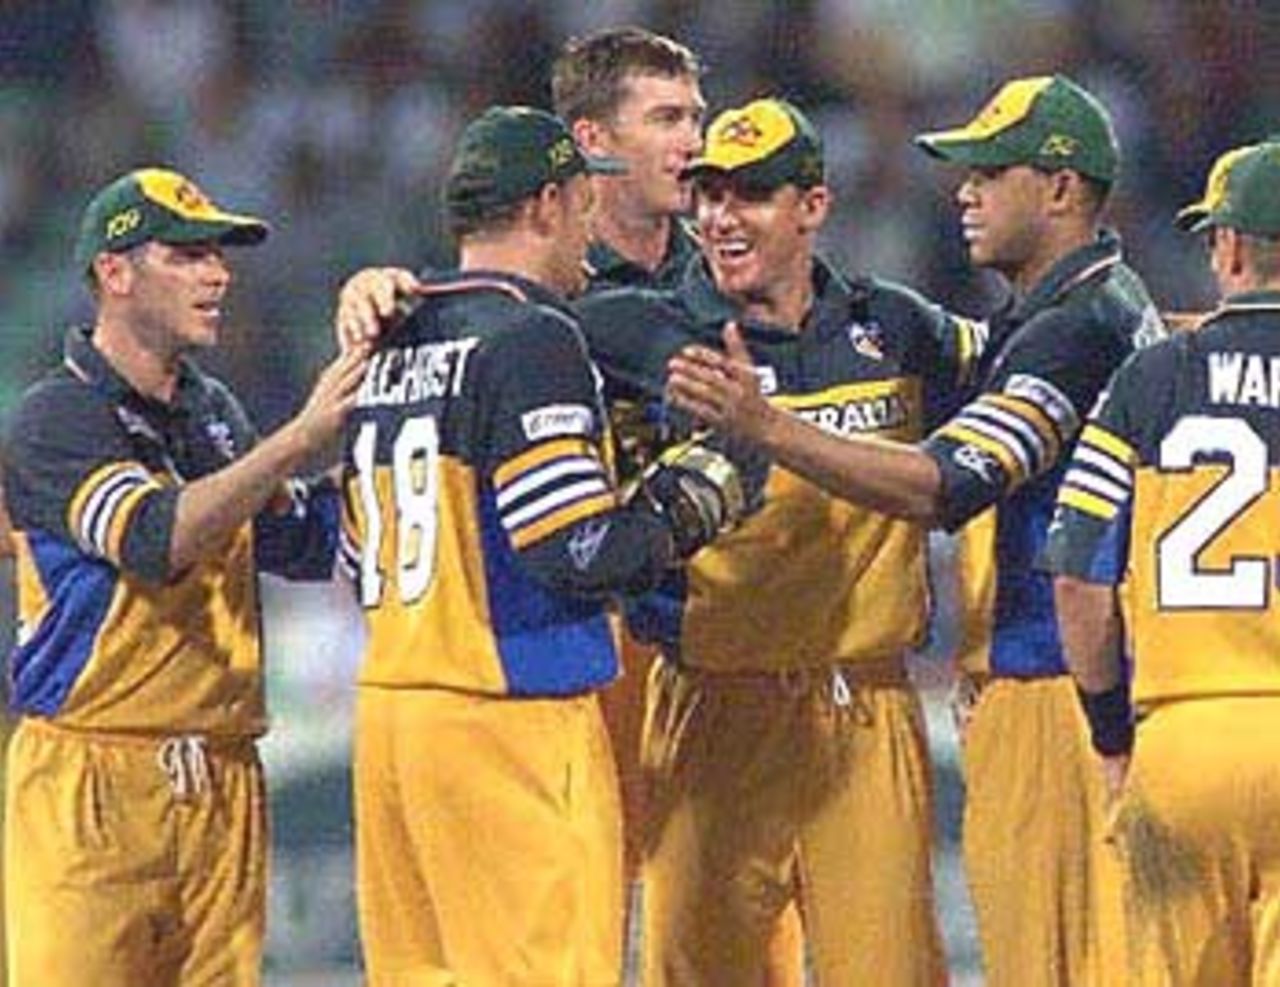 Australian wicketkeeper Adam Gilchrist (2nd L) is congratulated by teammates after catching South African batsman Jaques Kallis and dismissing him for 51 runs during a ODI match at the Kingsmead oval in Durban, 12 April 2000.